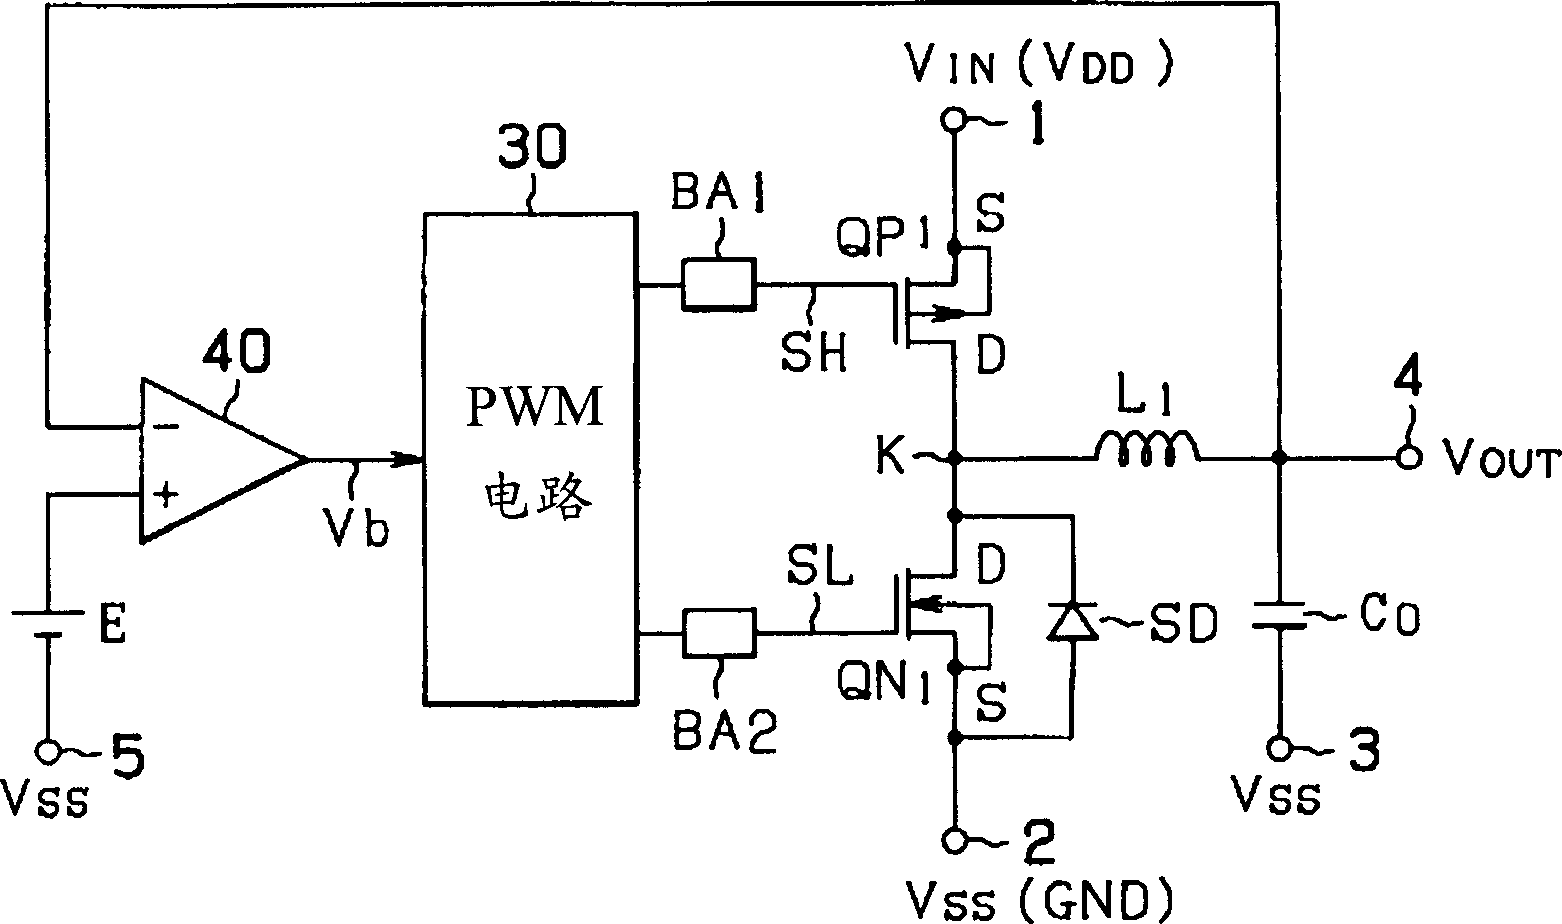 Power circuit and PVVM circuit